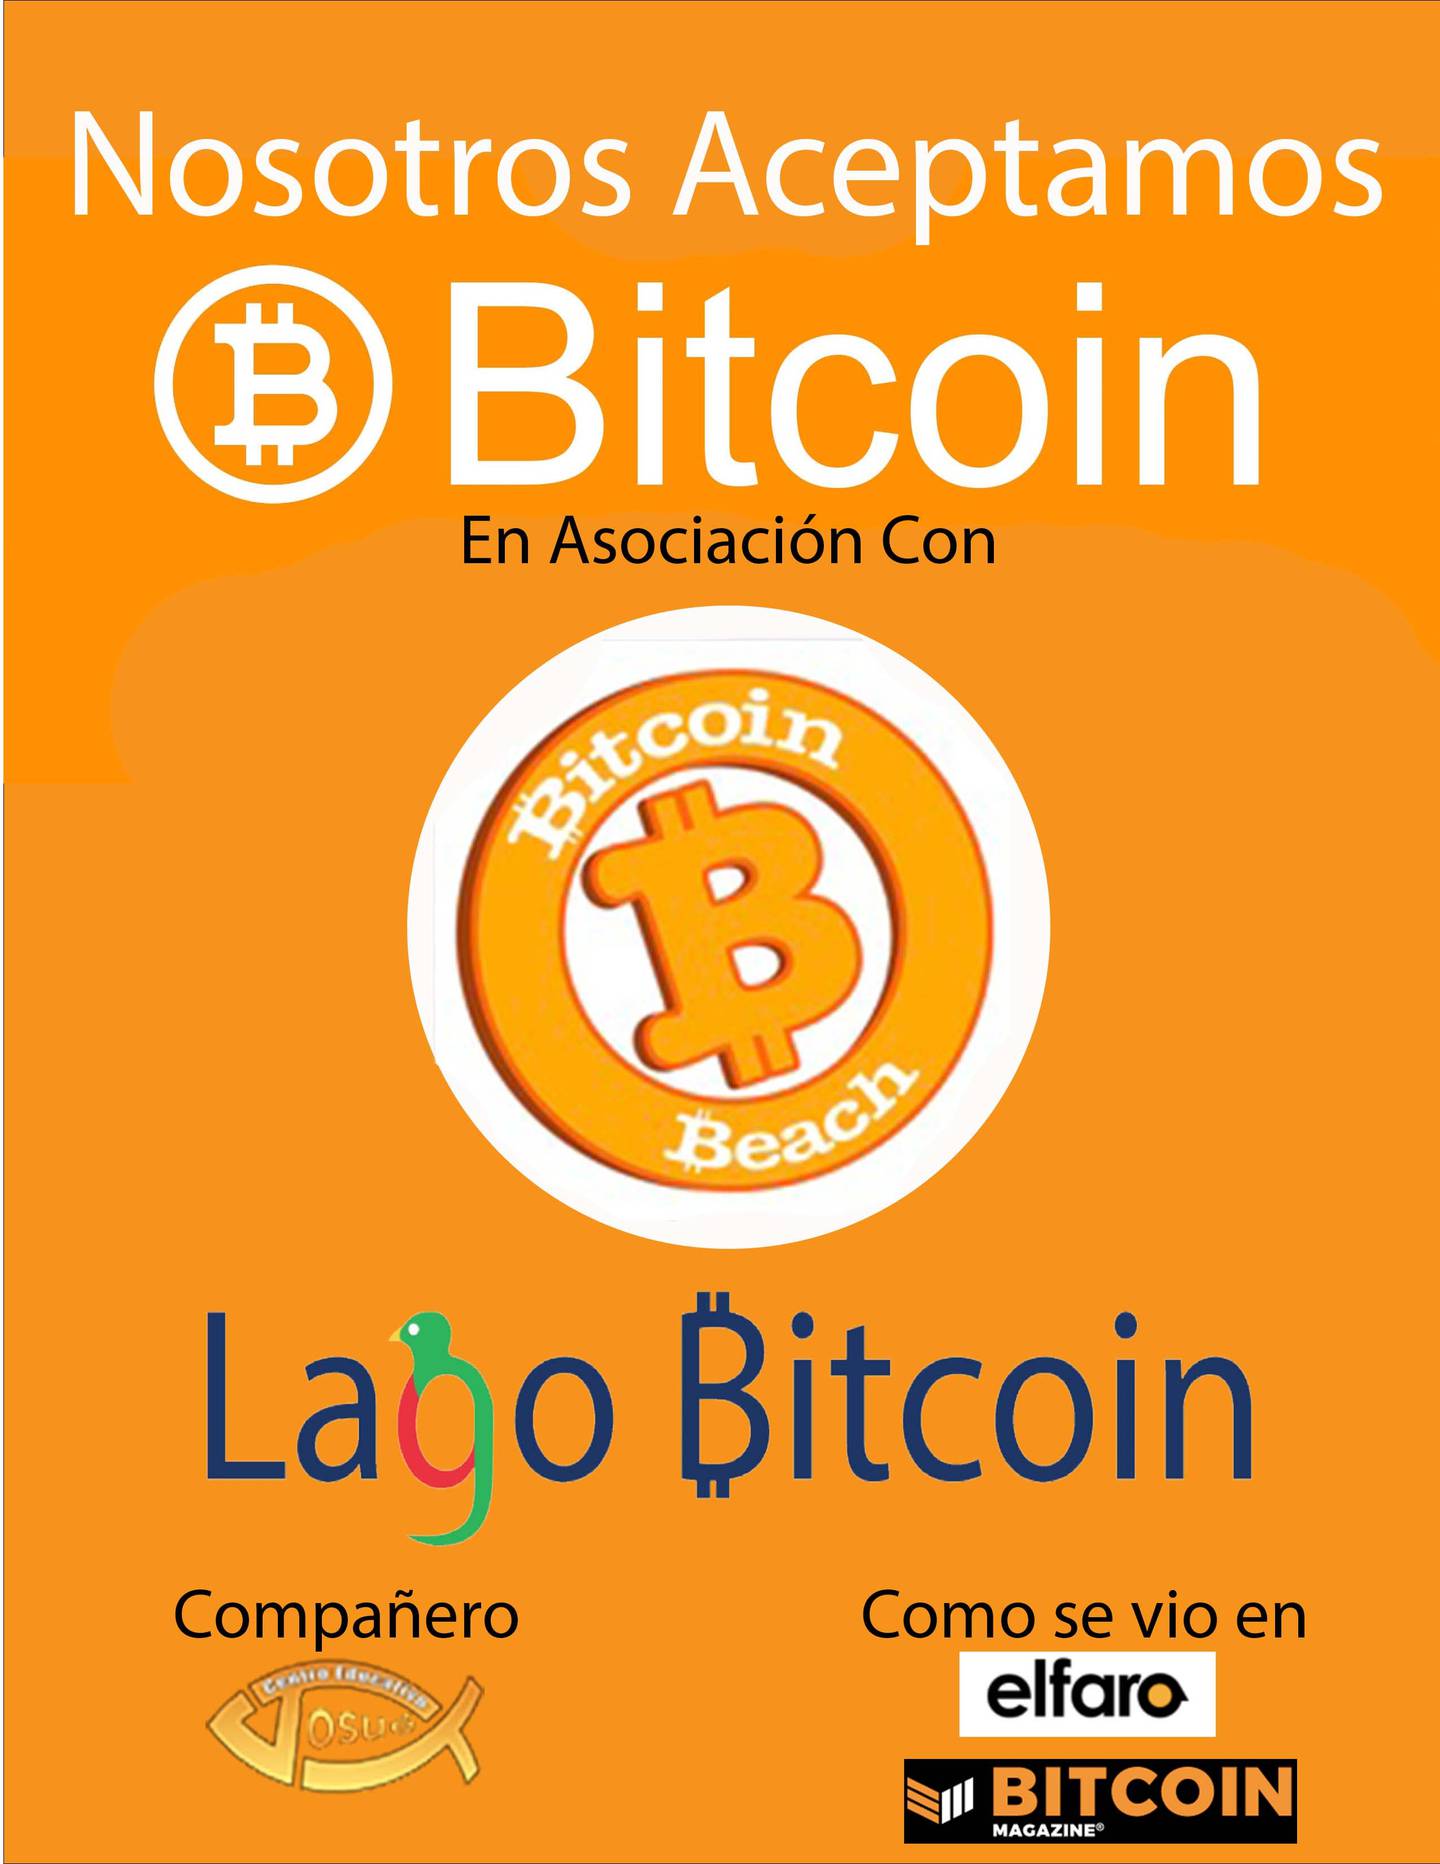 A sign posted by businesses that accept Bitcoin in Panajachel.dfd